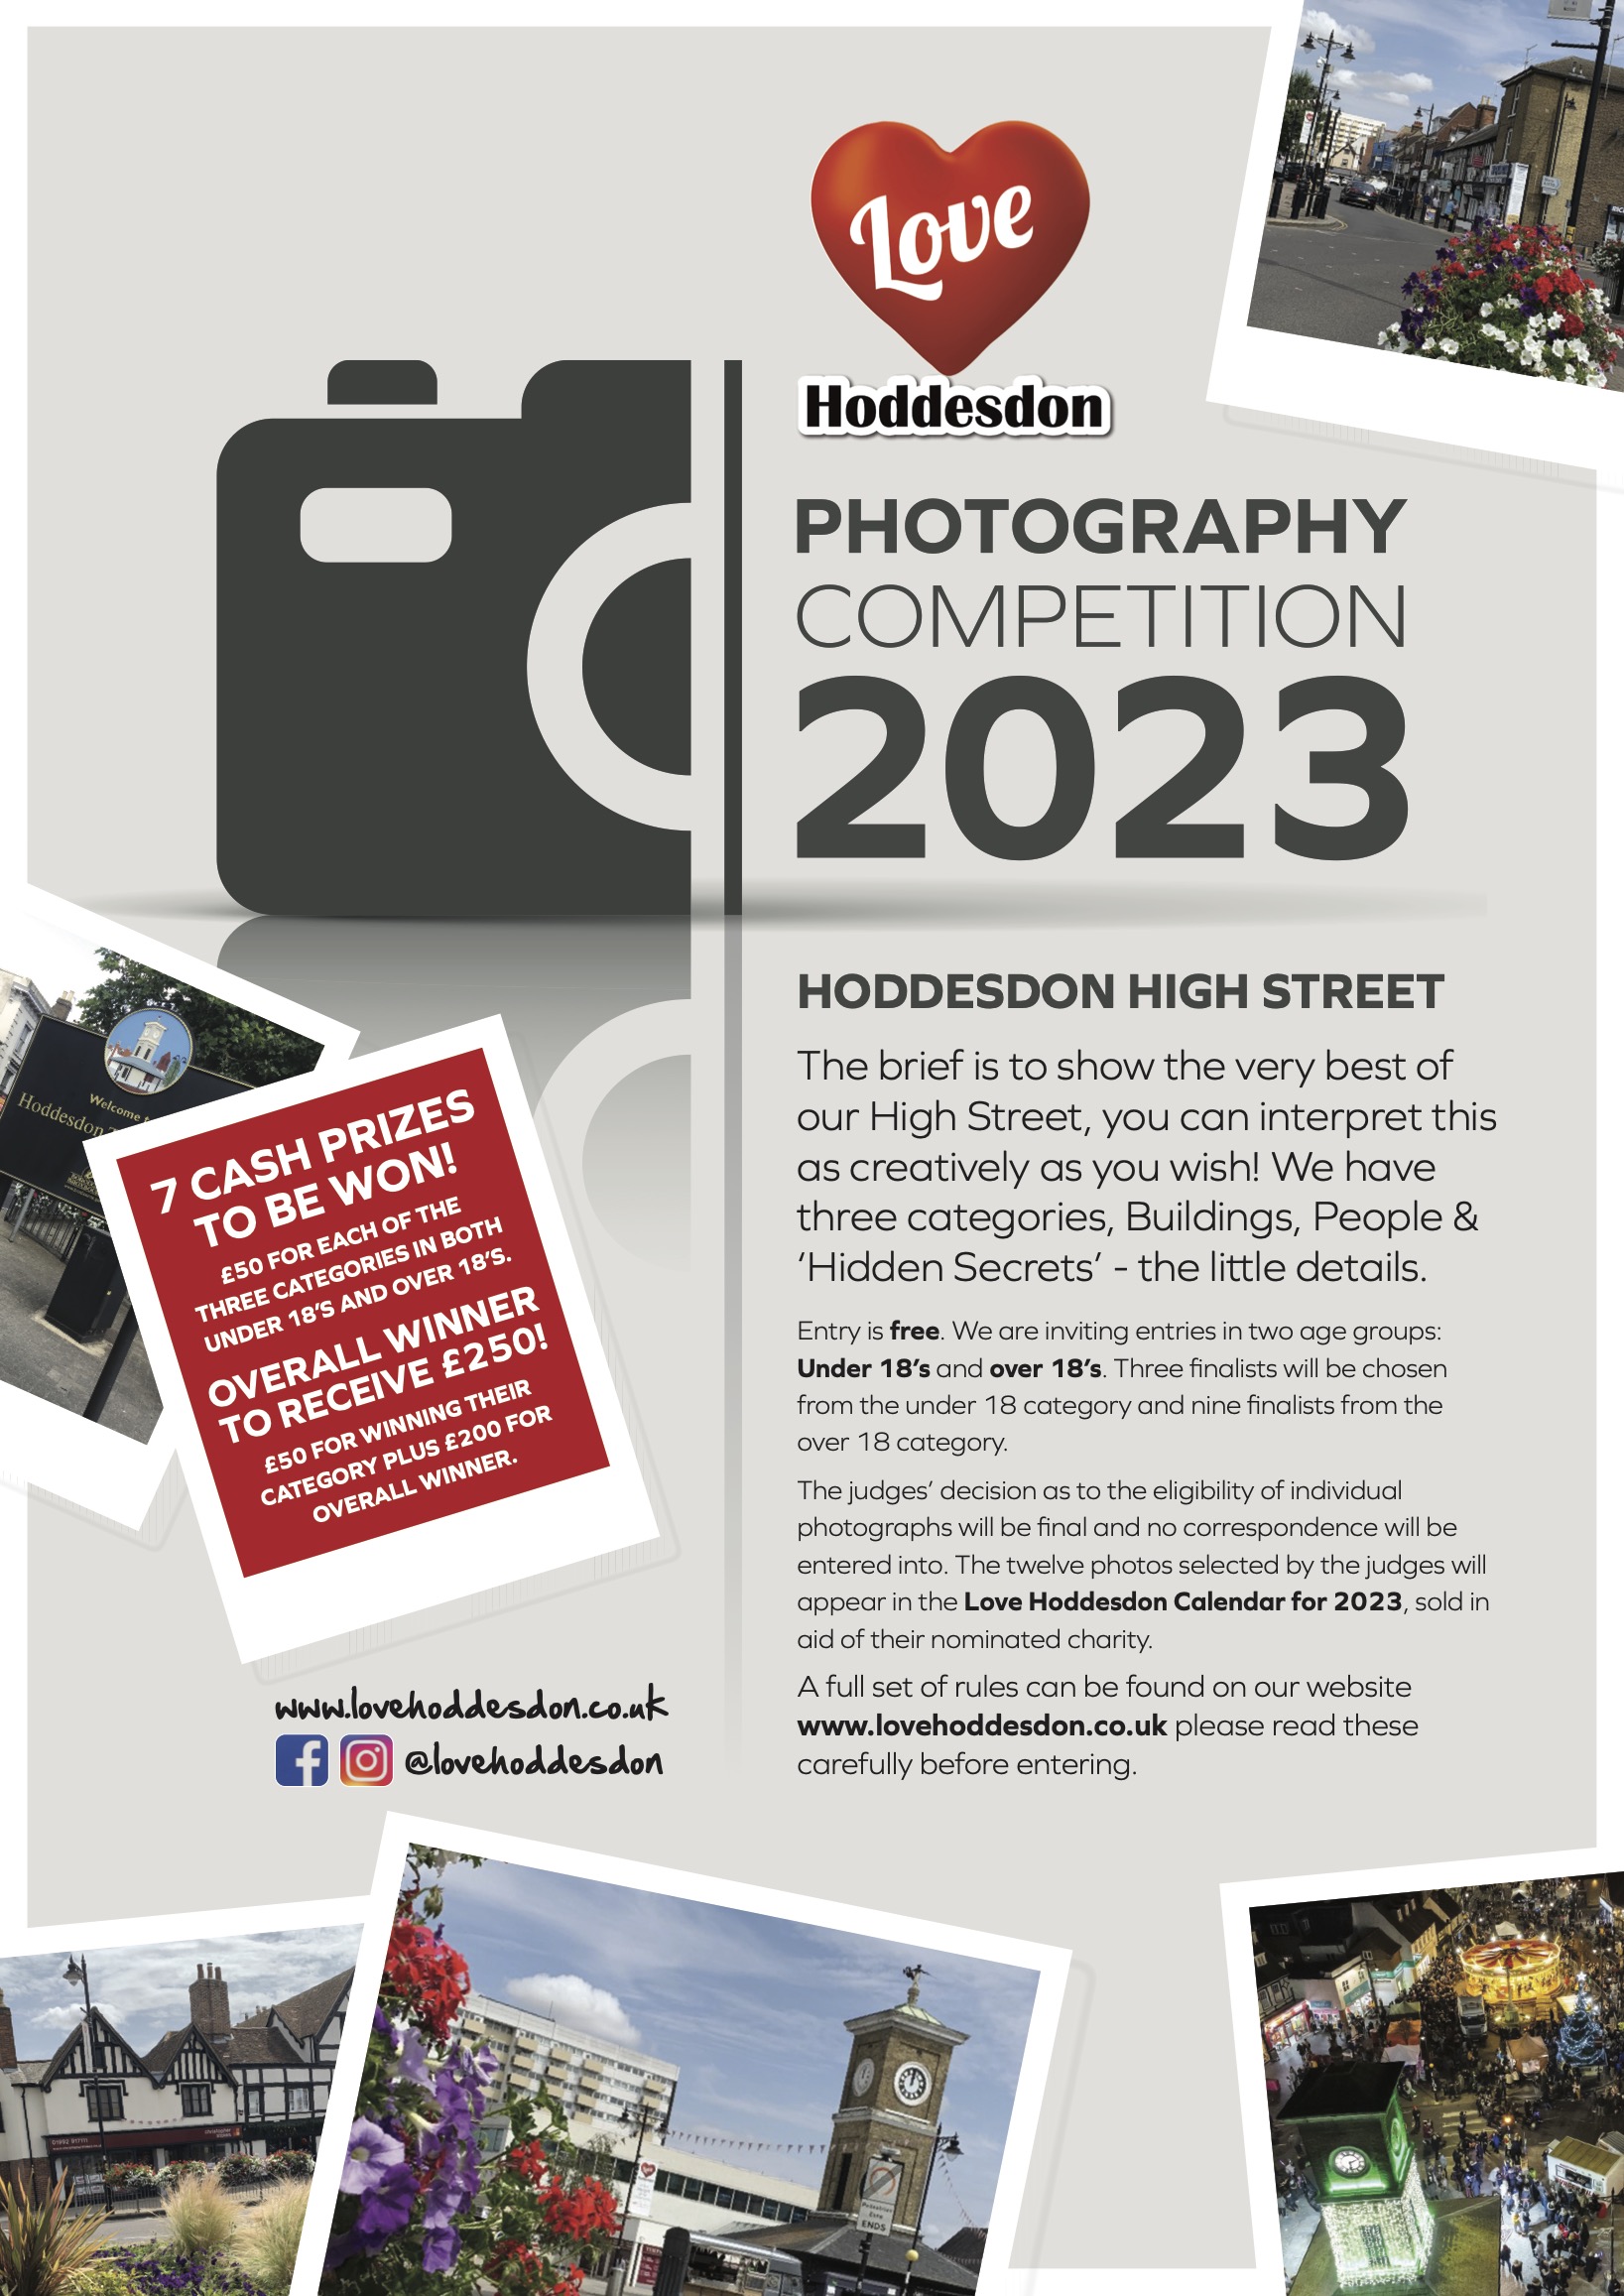 Hoddesdon High Street Photographic Competition 2023